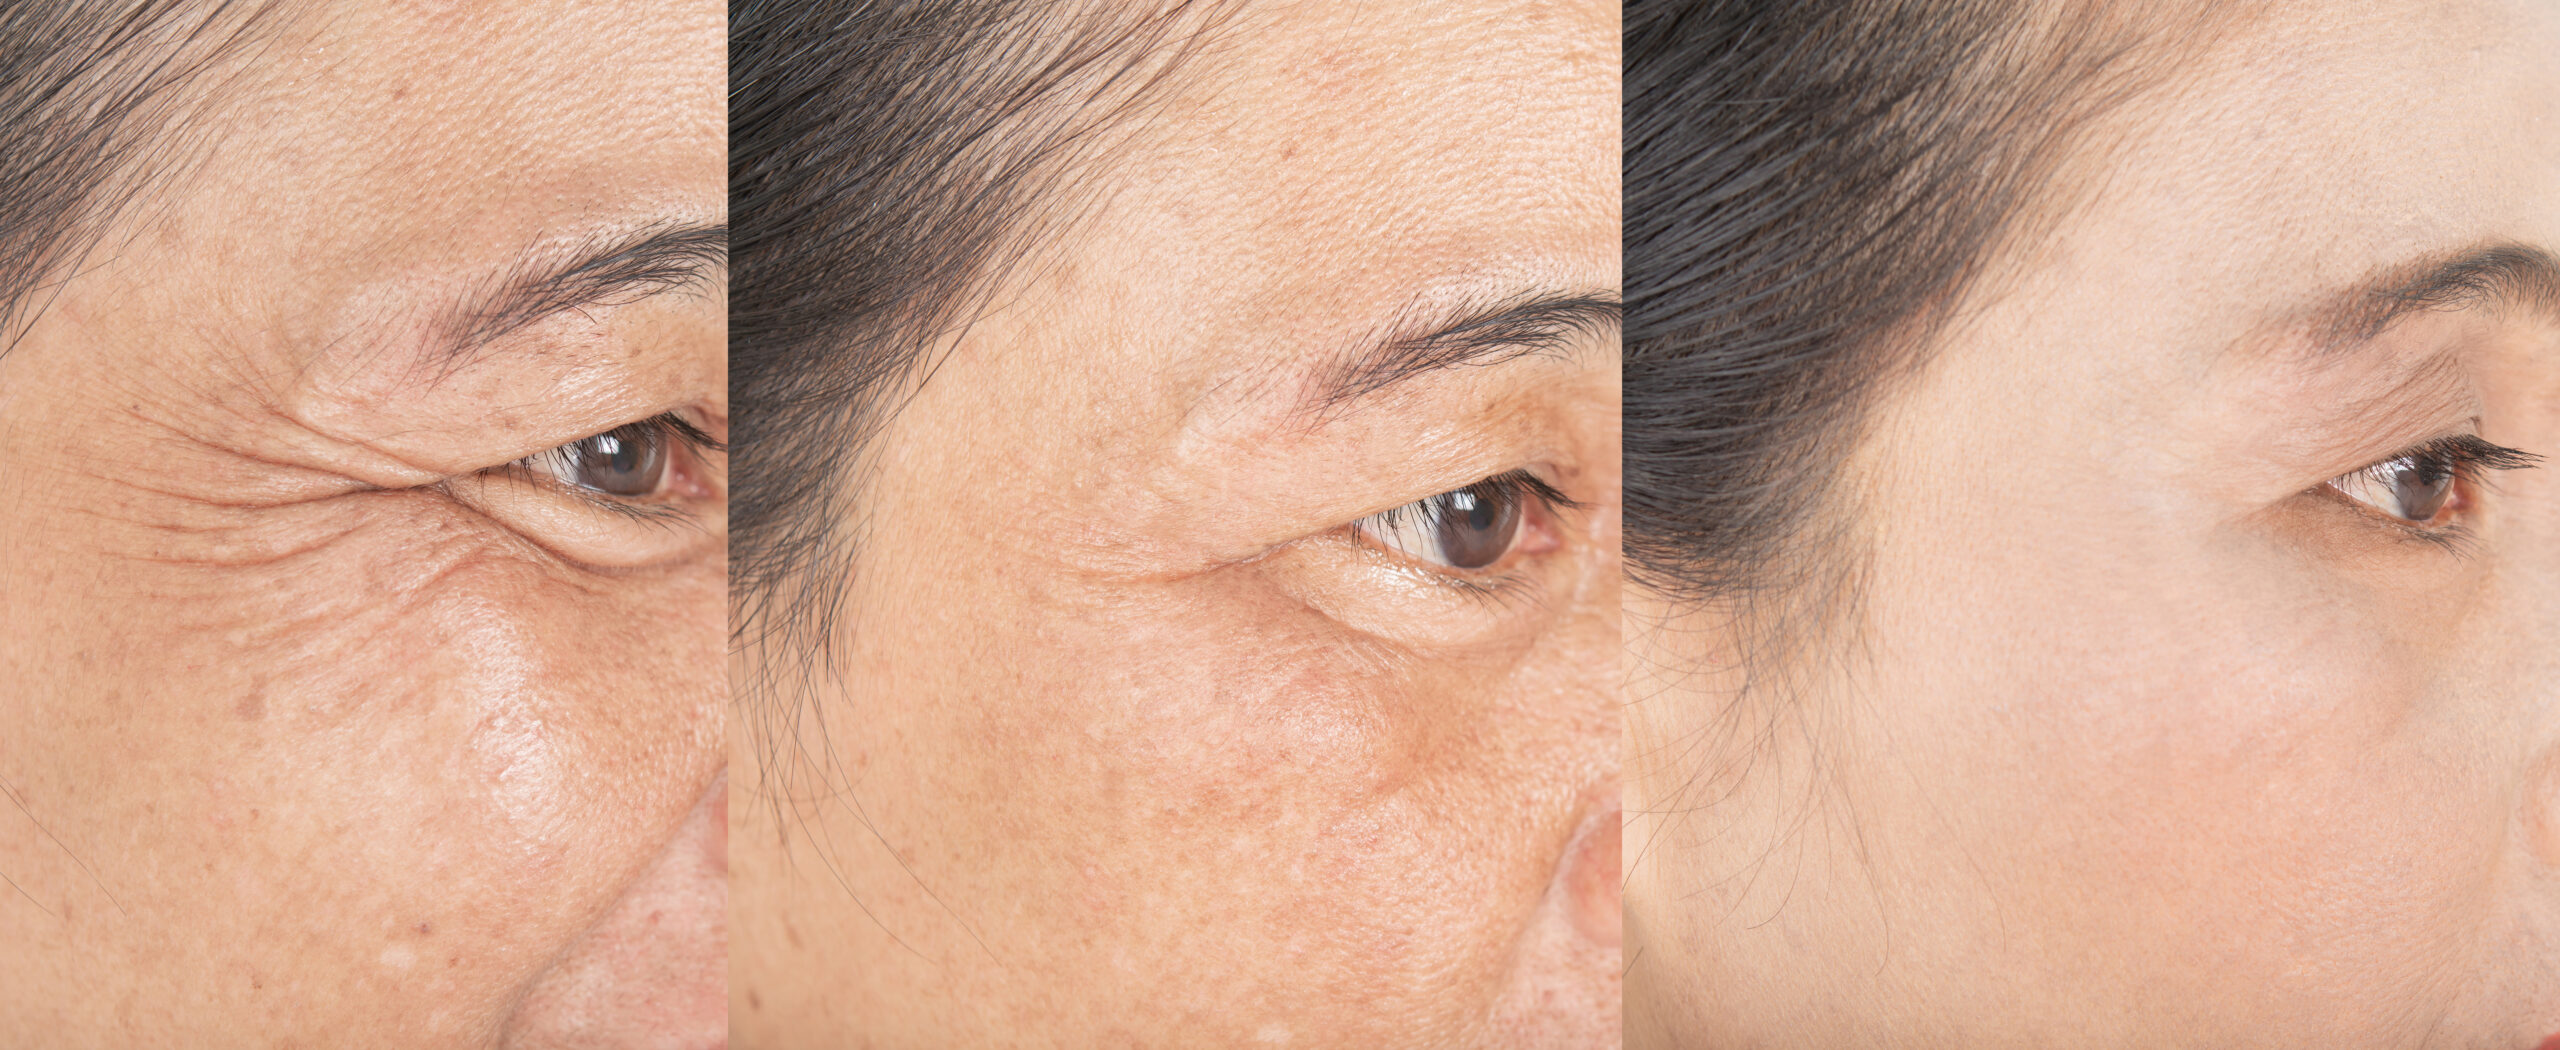 Wrinkles,On,The,Eyes.,And,Before,And,After,Melasma,And